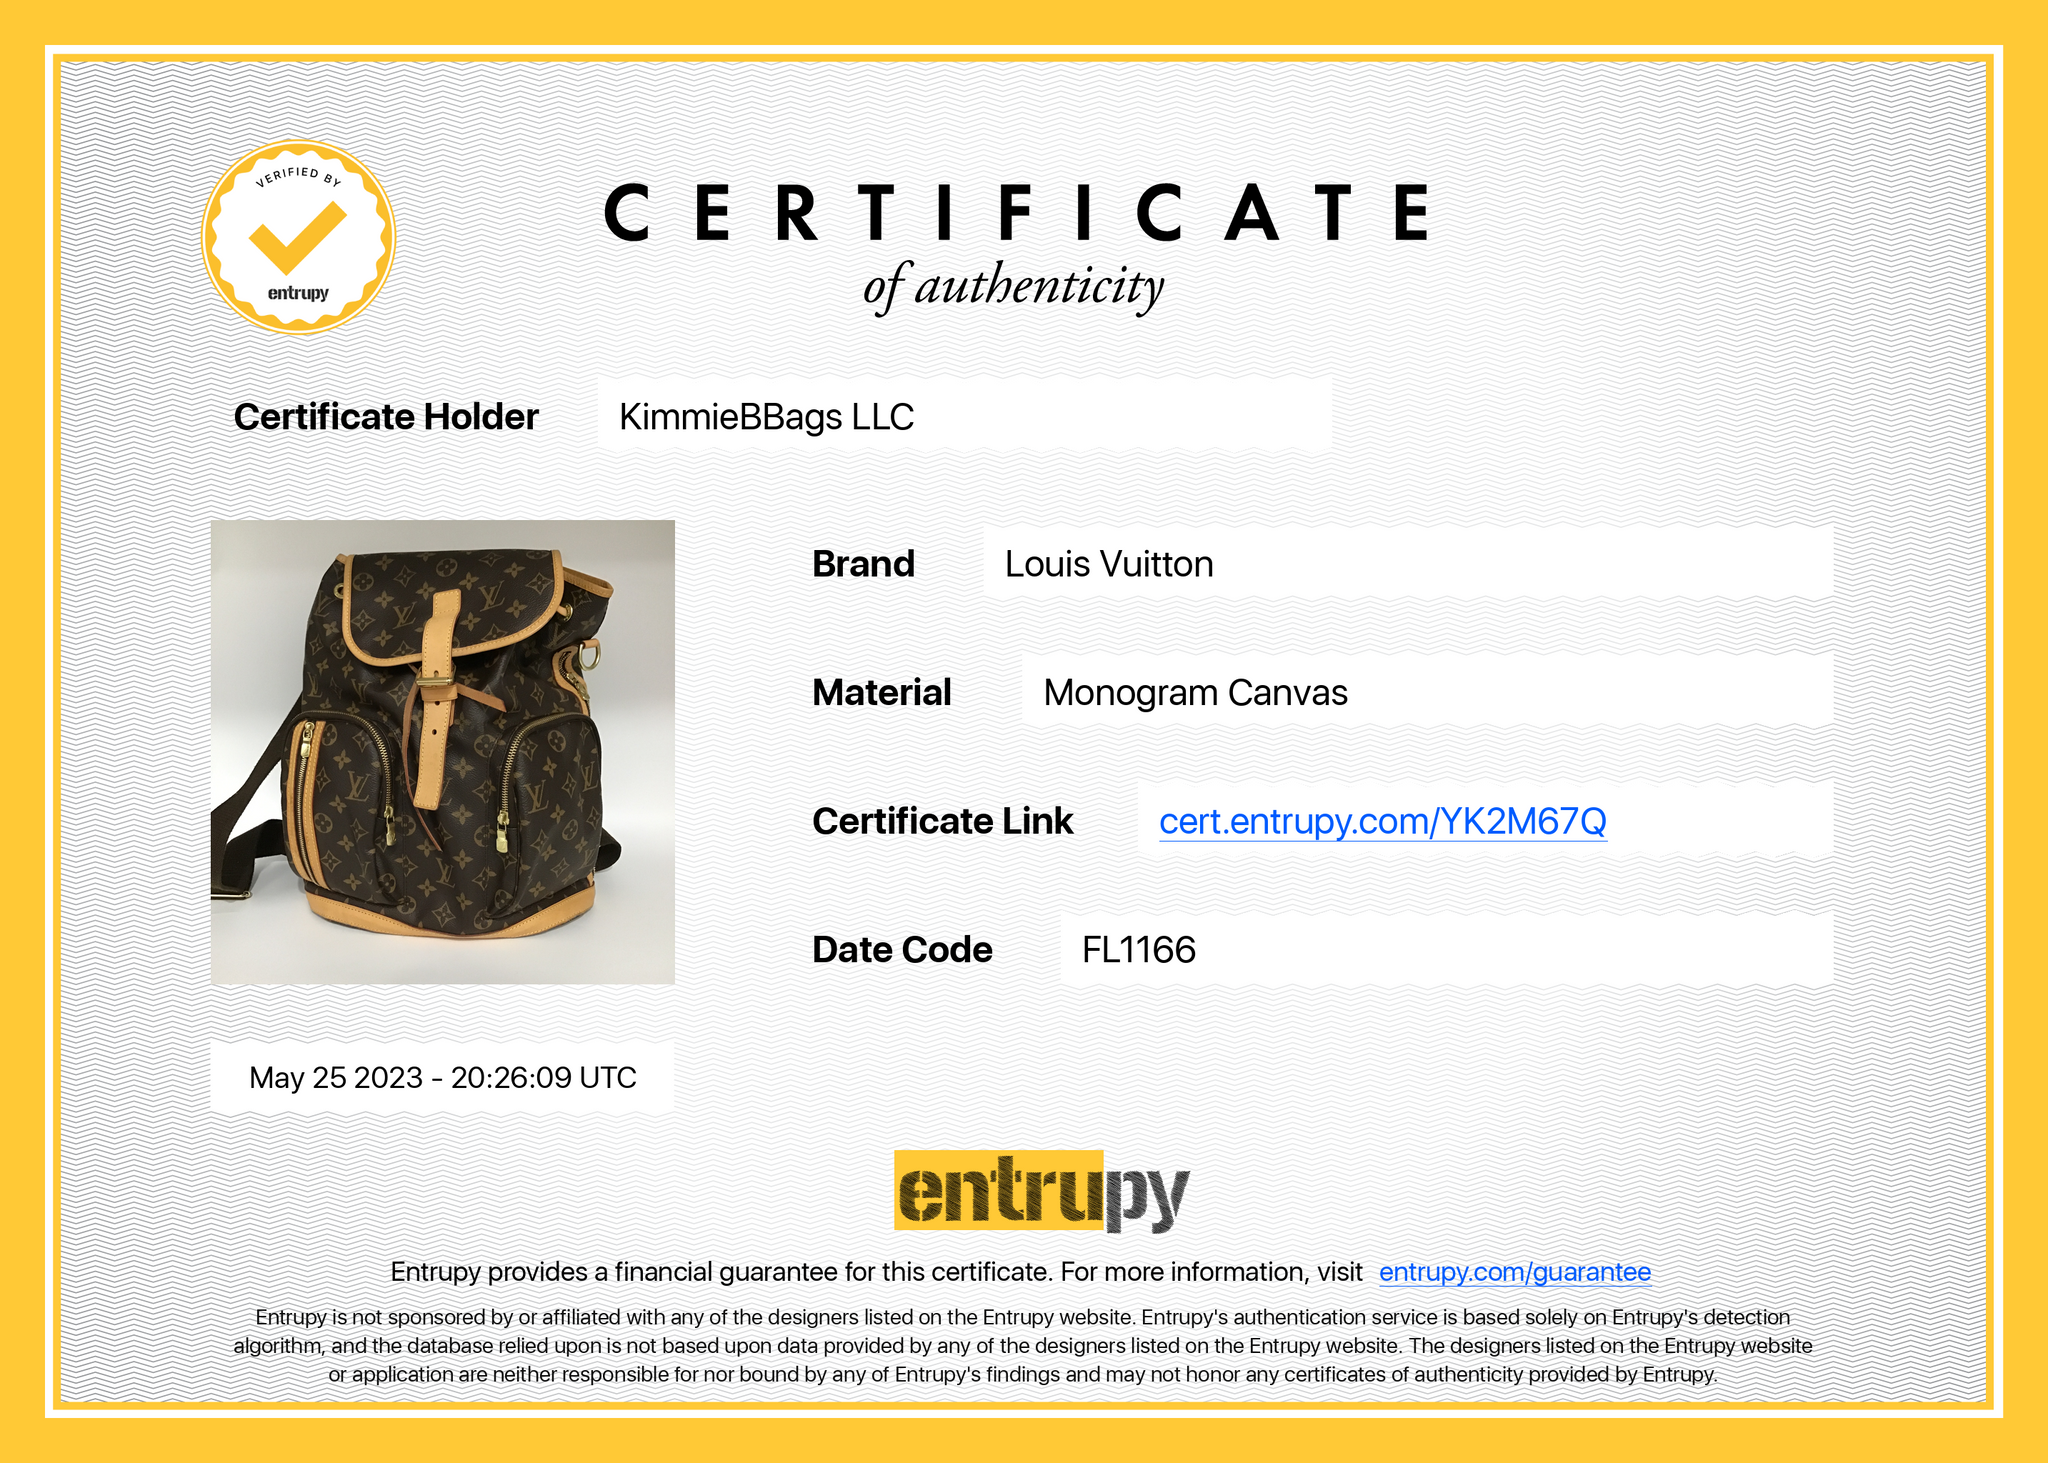 Louis Vuitton 2013 pre-owned Monogram Sac a Dos Bosphore Backpack